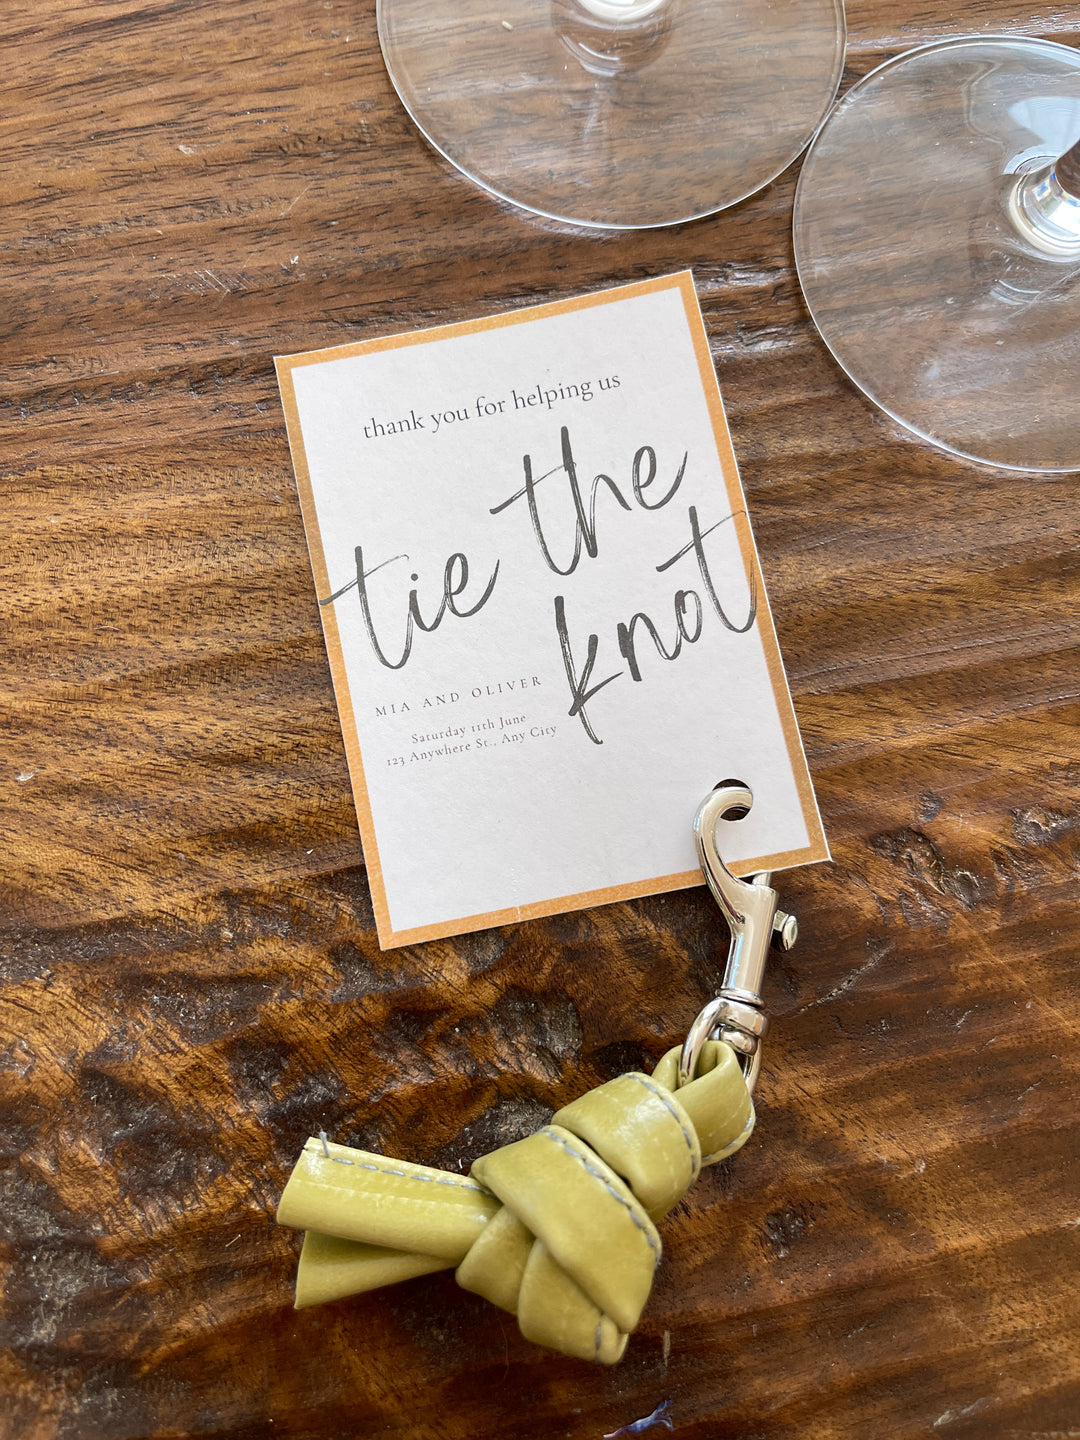 "Tie the Knot" - French Knot Bag Charm